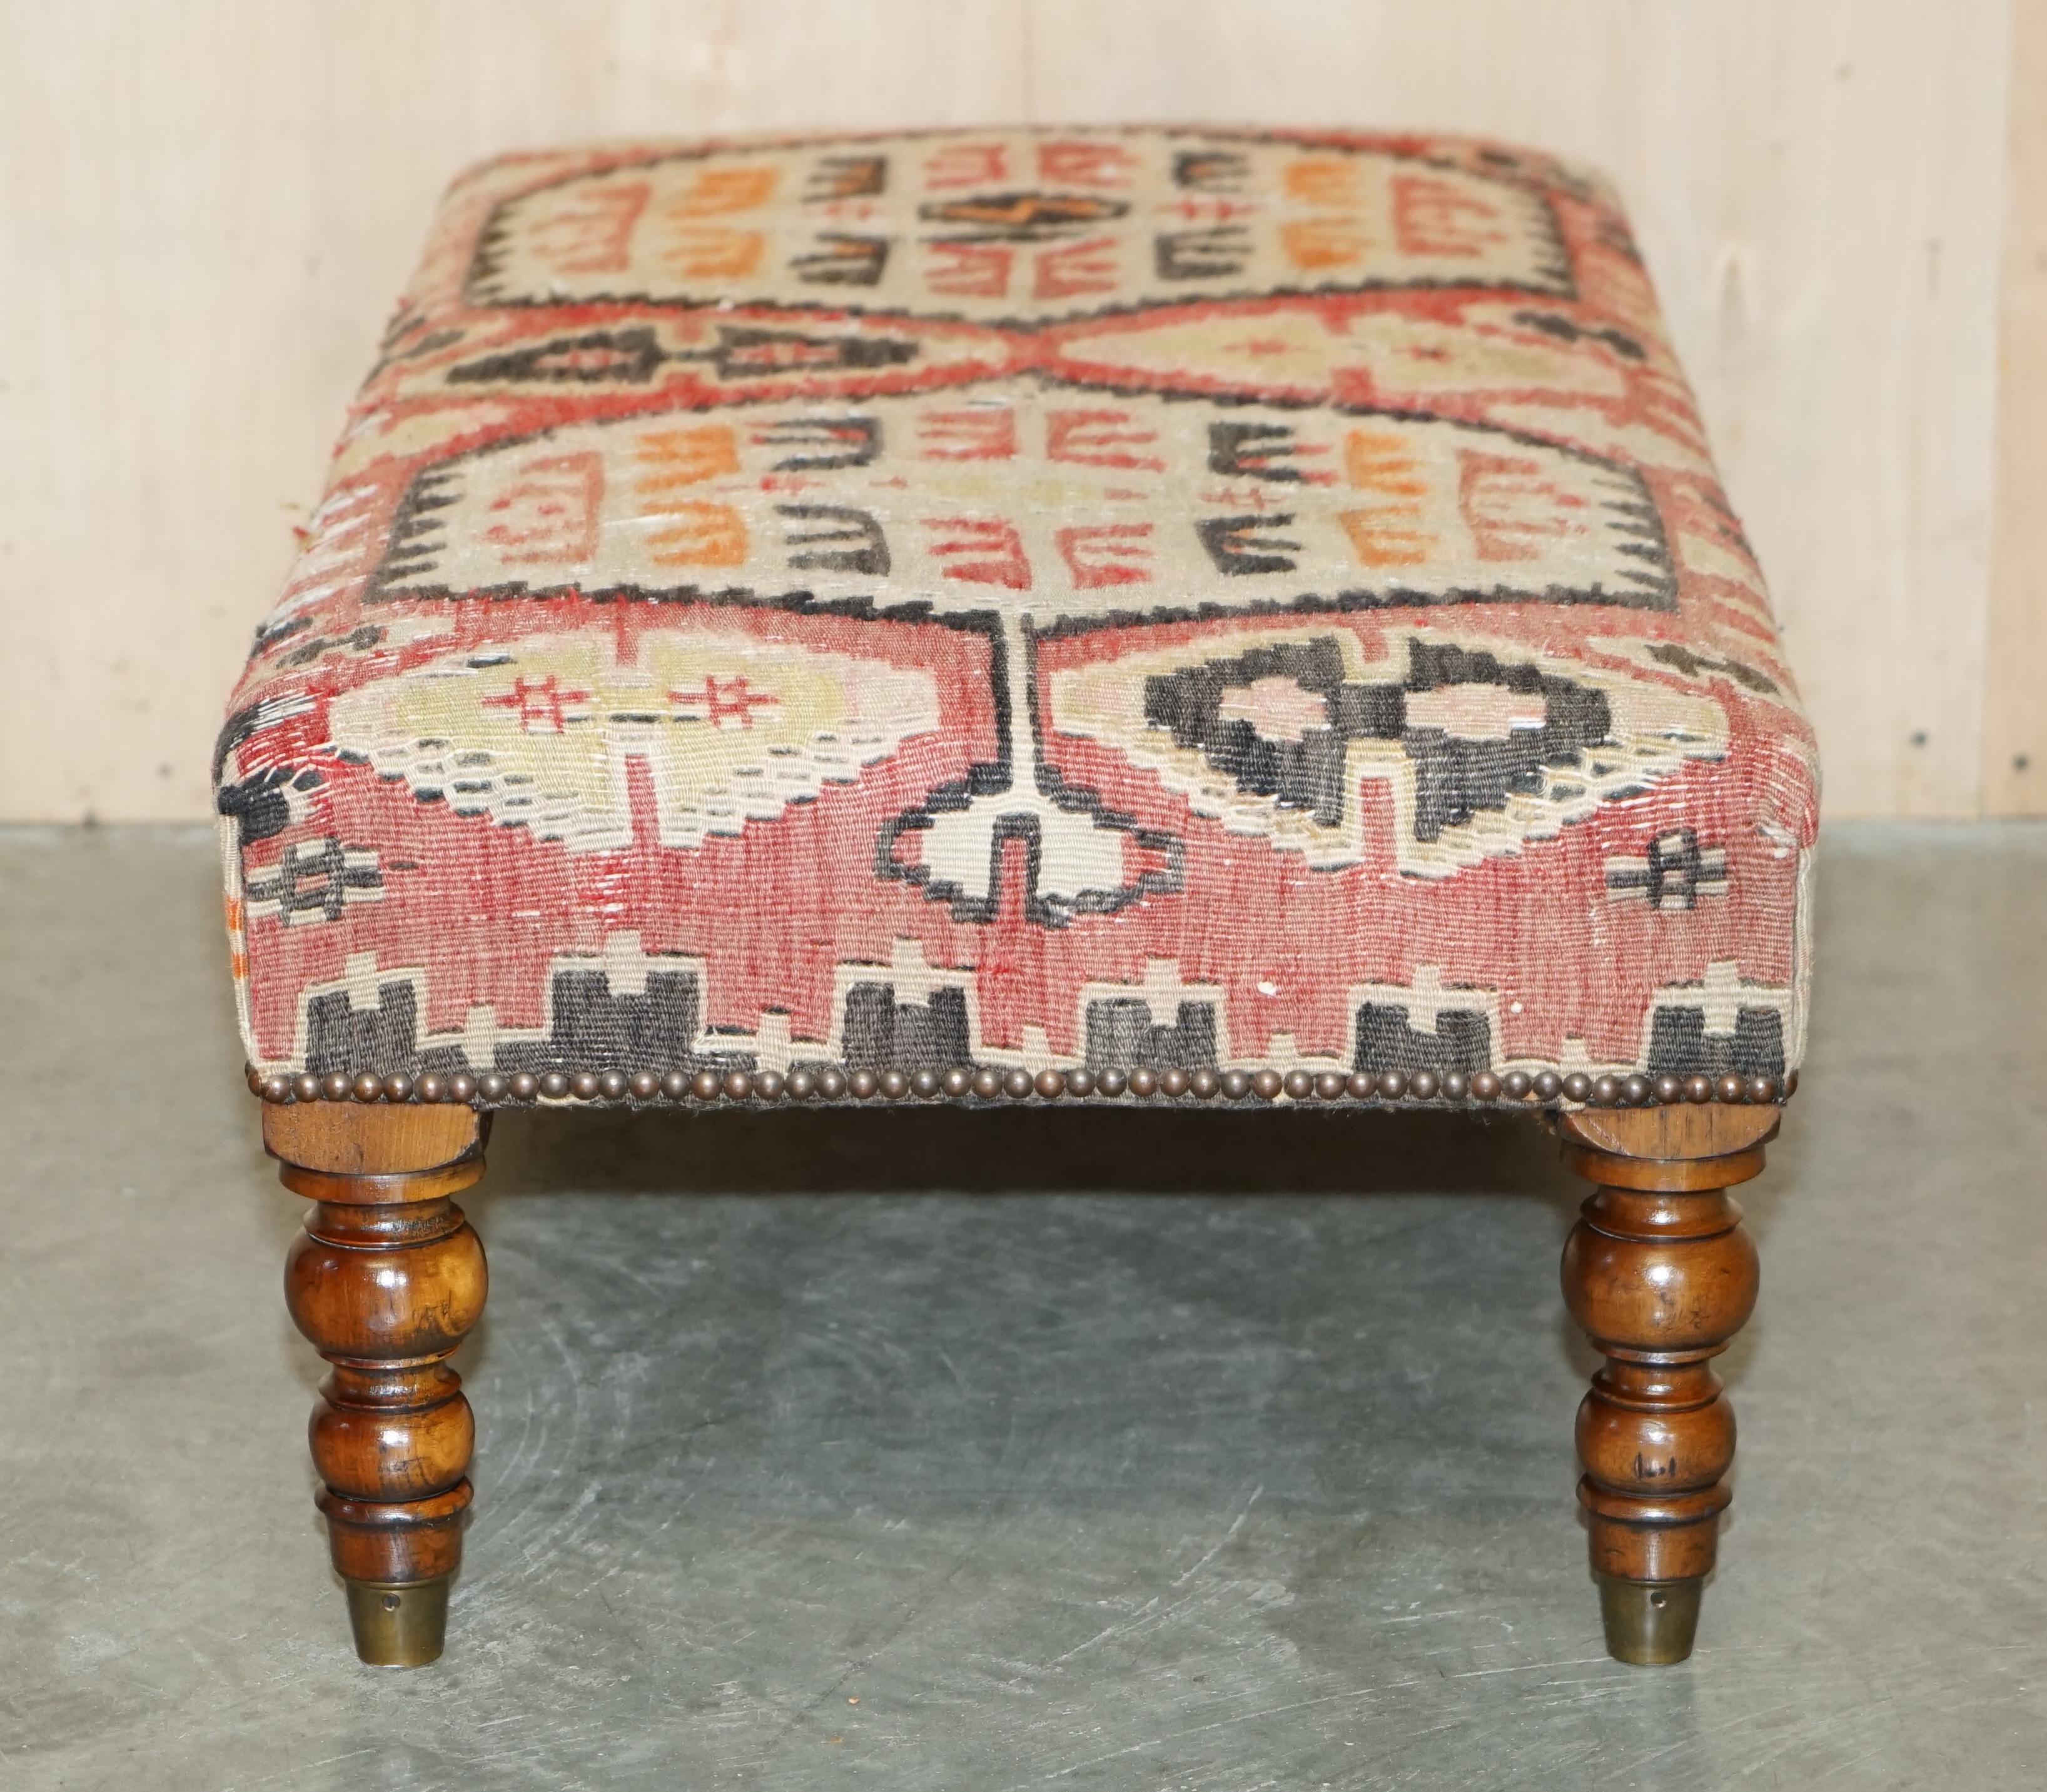 STUNNING AND COLLECTABLE ViNTAGE GEORGE SMITH CHELSEA KILIM FOOTSTOOL OTTOMAN 11